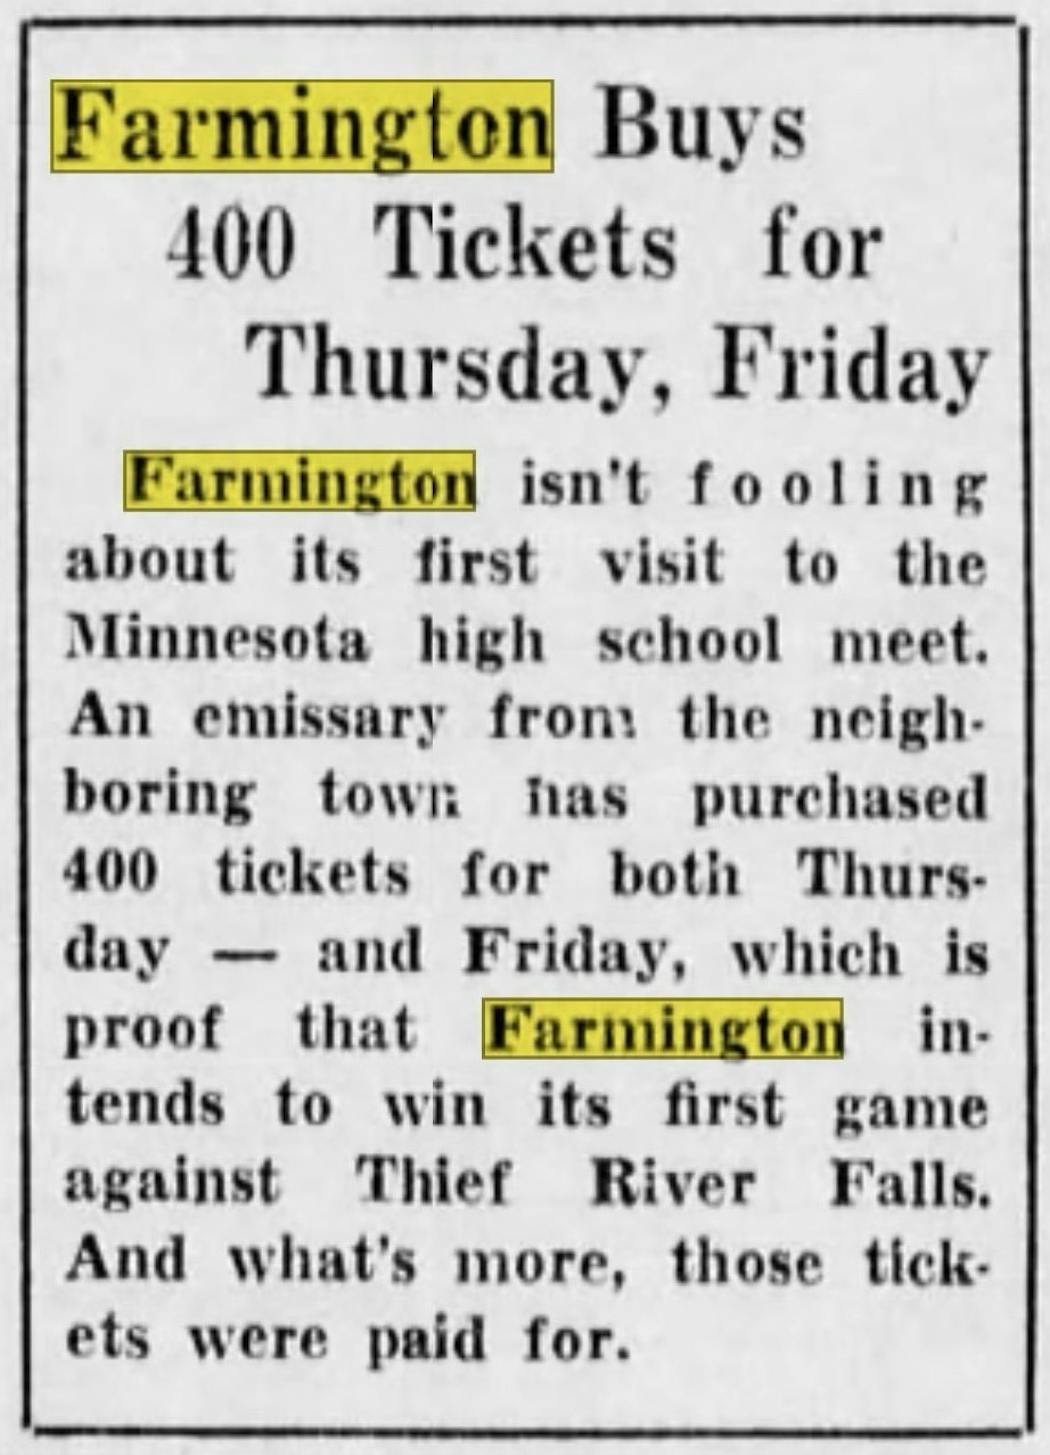 Local media made it clear there was interest in Farmington's 1937 team.